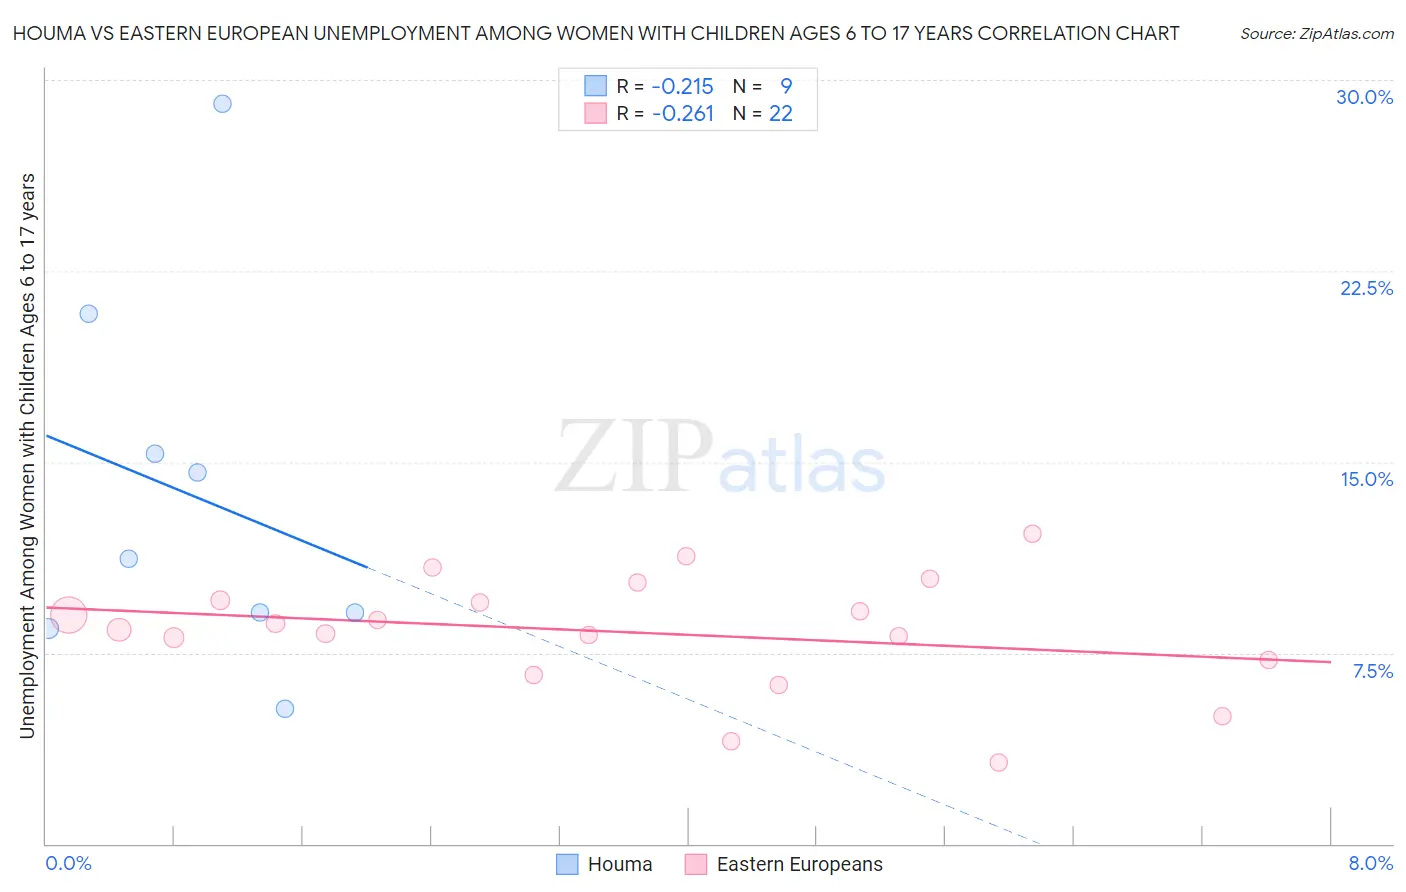 Houma vs Eastern European Unemployment Among Women with Children Ages 6 to 17 years